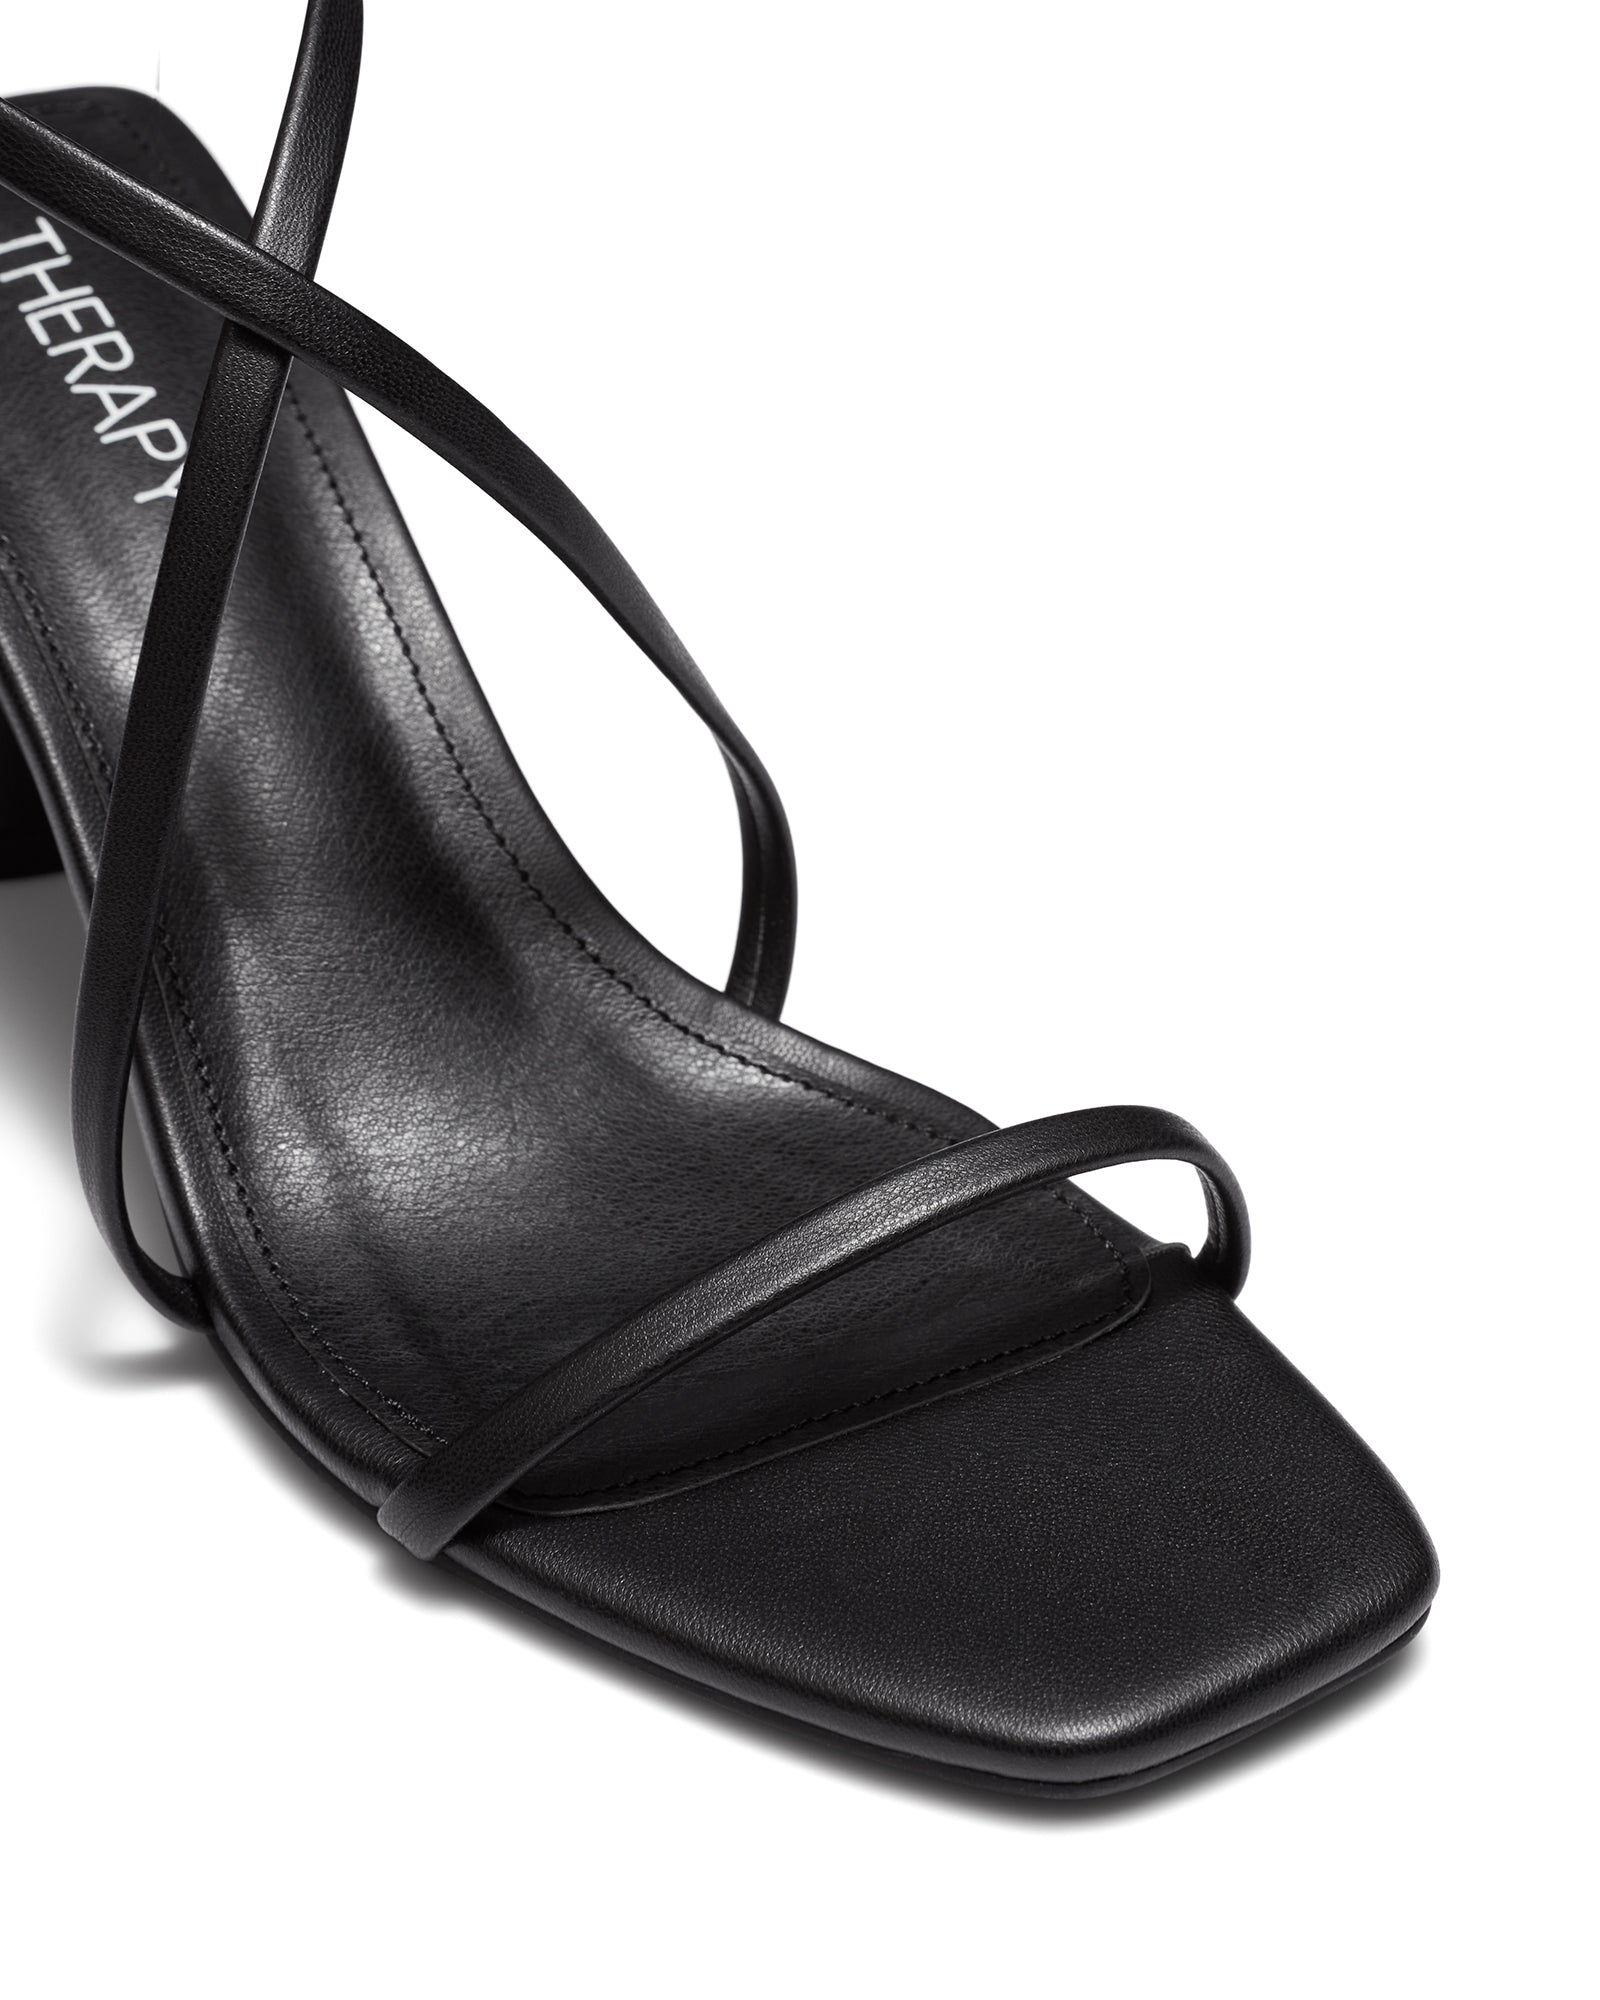 Therapy Shoes Kairo Black | Women's Heels | Sandals | Strappy | Dress